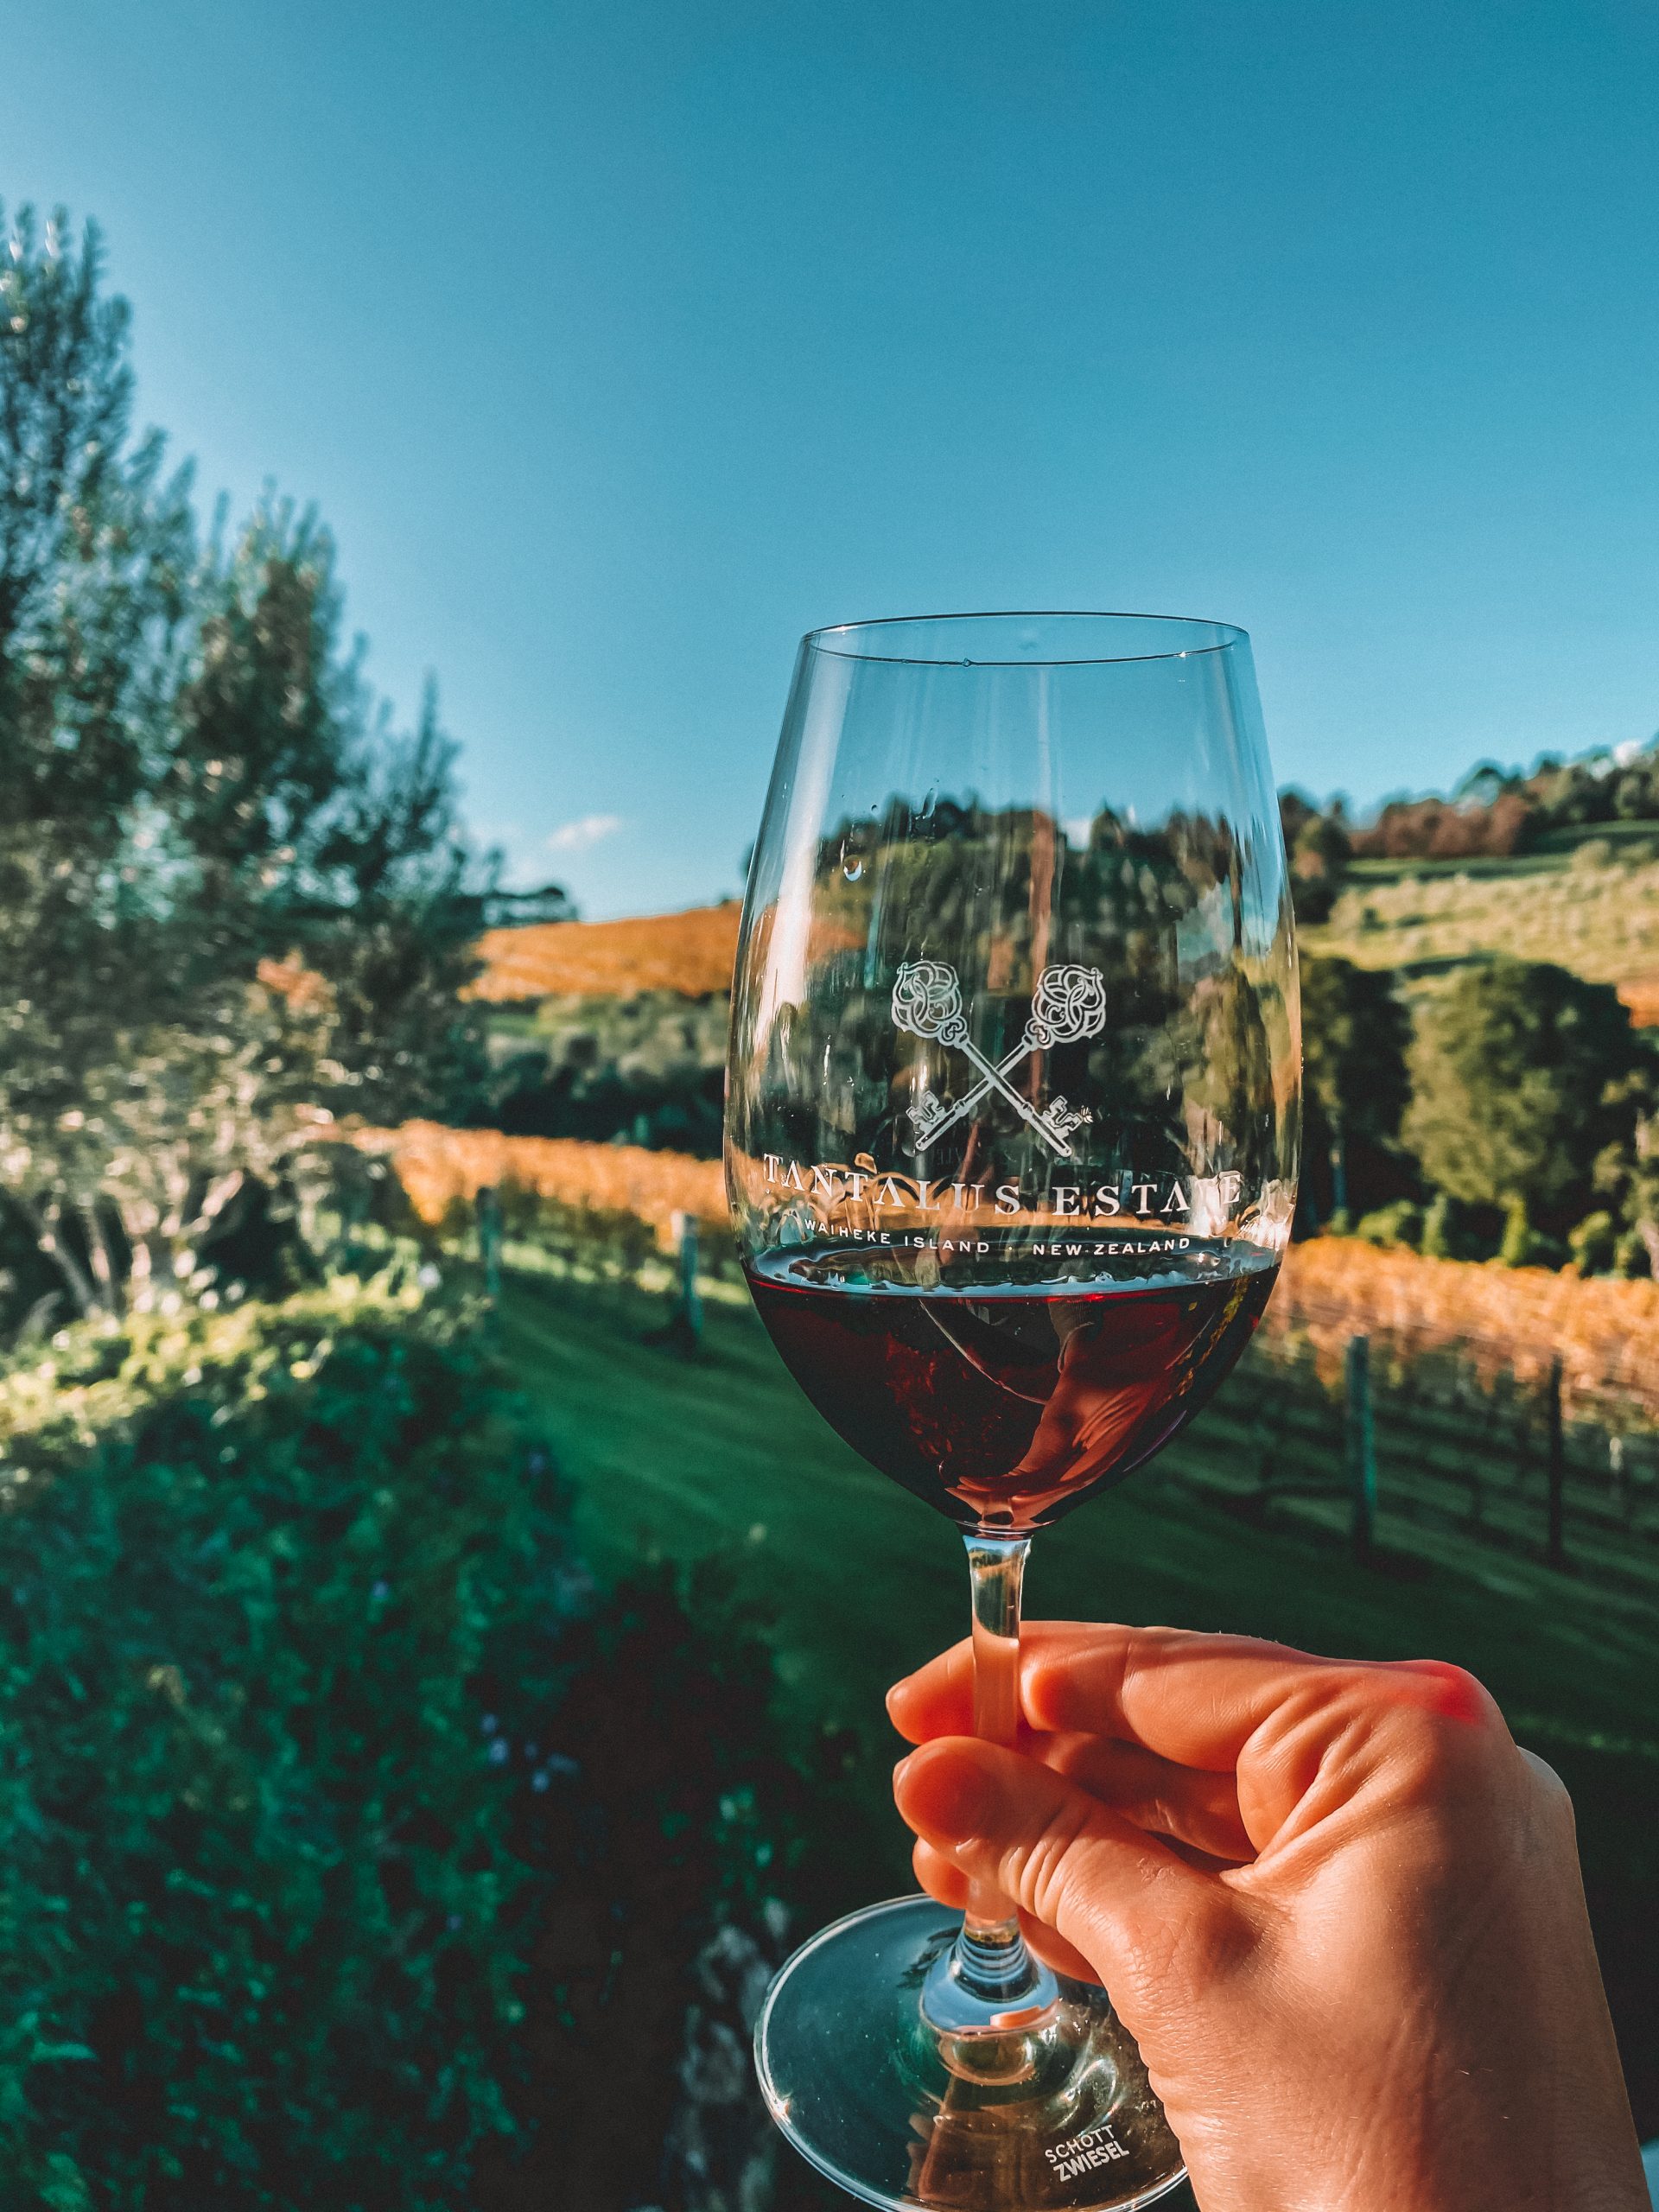 A hand holding a wine glass with a small amount of red wine inside it overlooking a green vineyard with bushes, trees and vines.